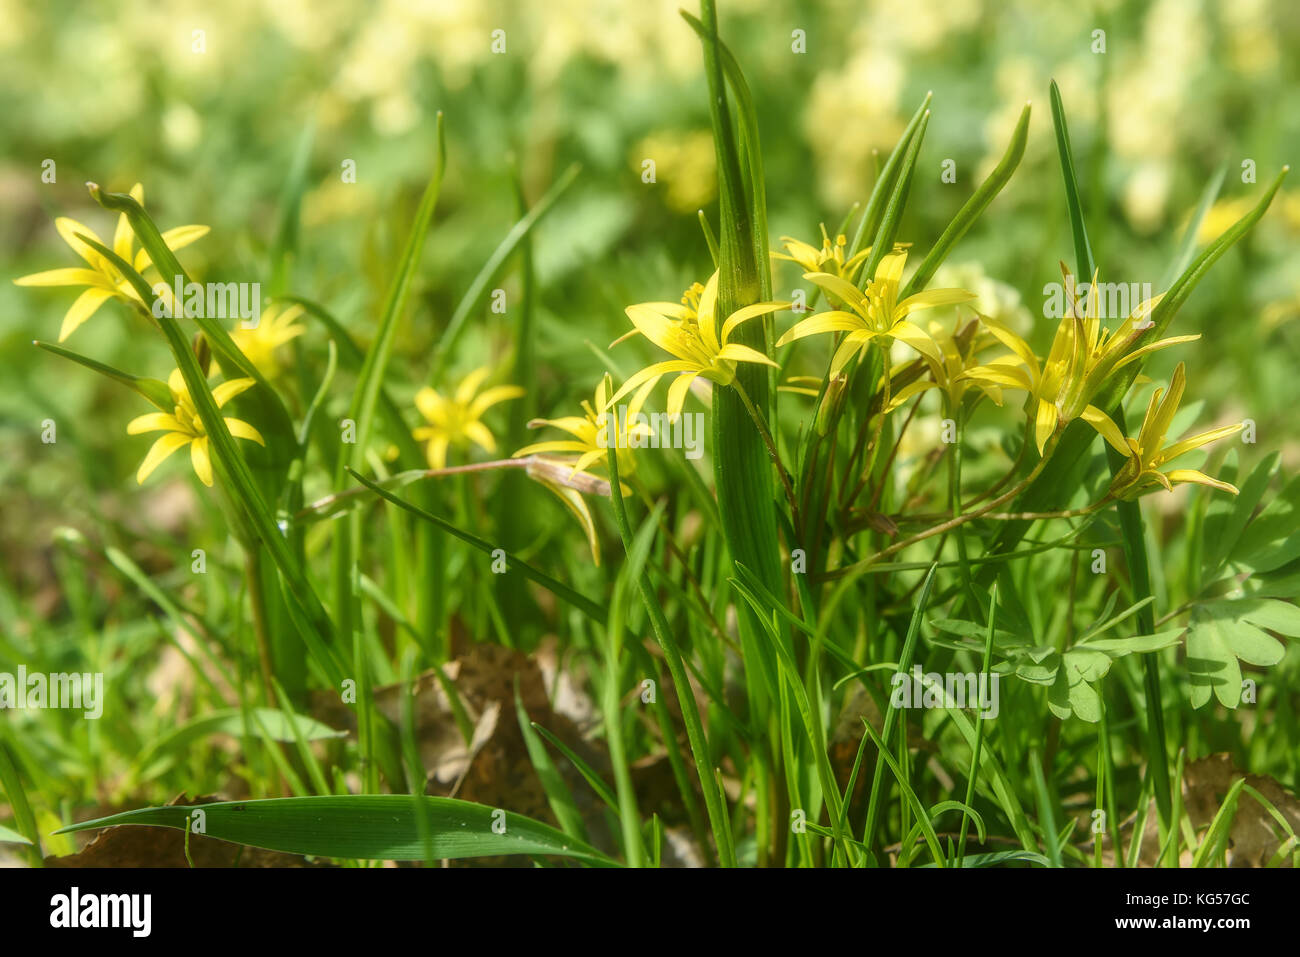 Beautiful spring floral background with bright small yellow flowers Gagea in the grass close up on a sunny day Stock Photo